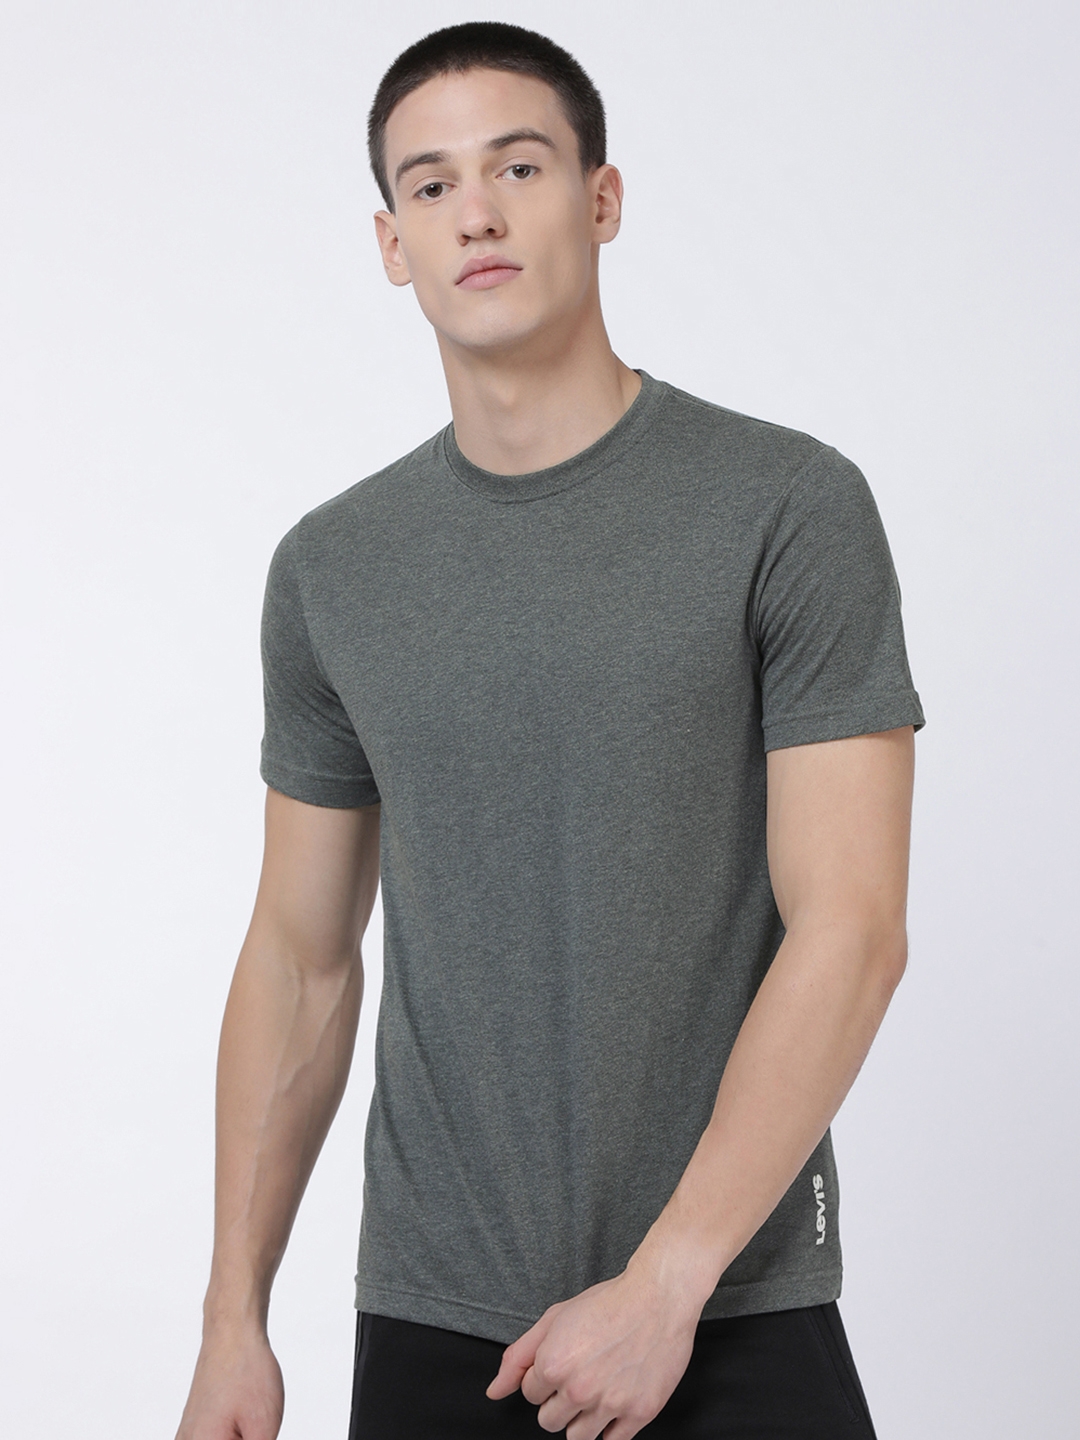 Levis Men Charcoal Grey Solid Round Neck Lounge T shirts